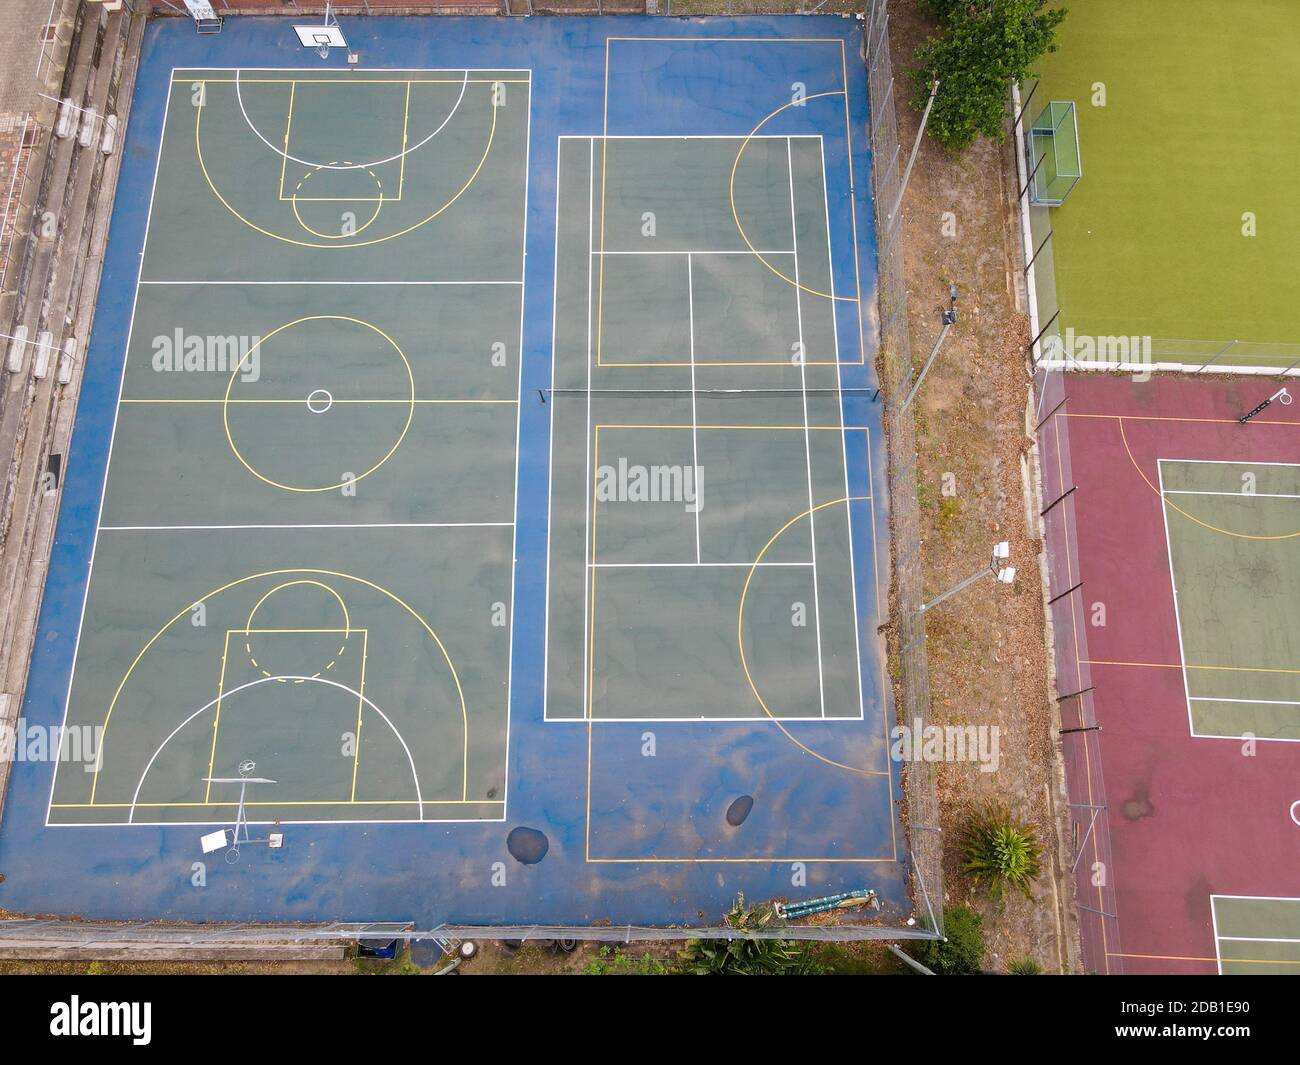 Basketball court seen from aerial view Stock Photo